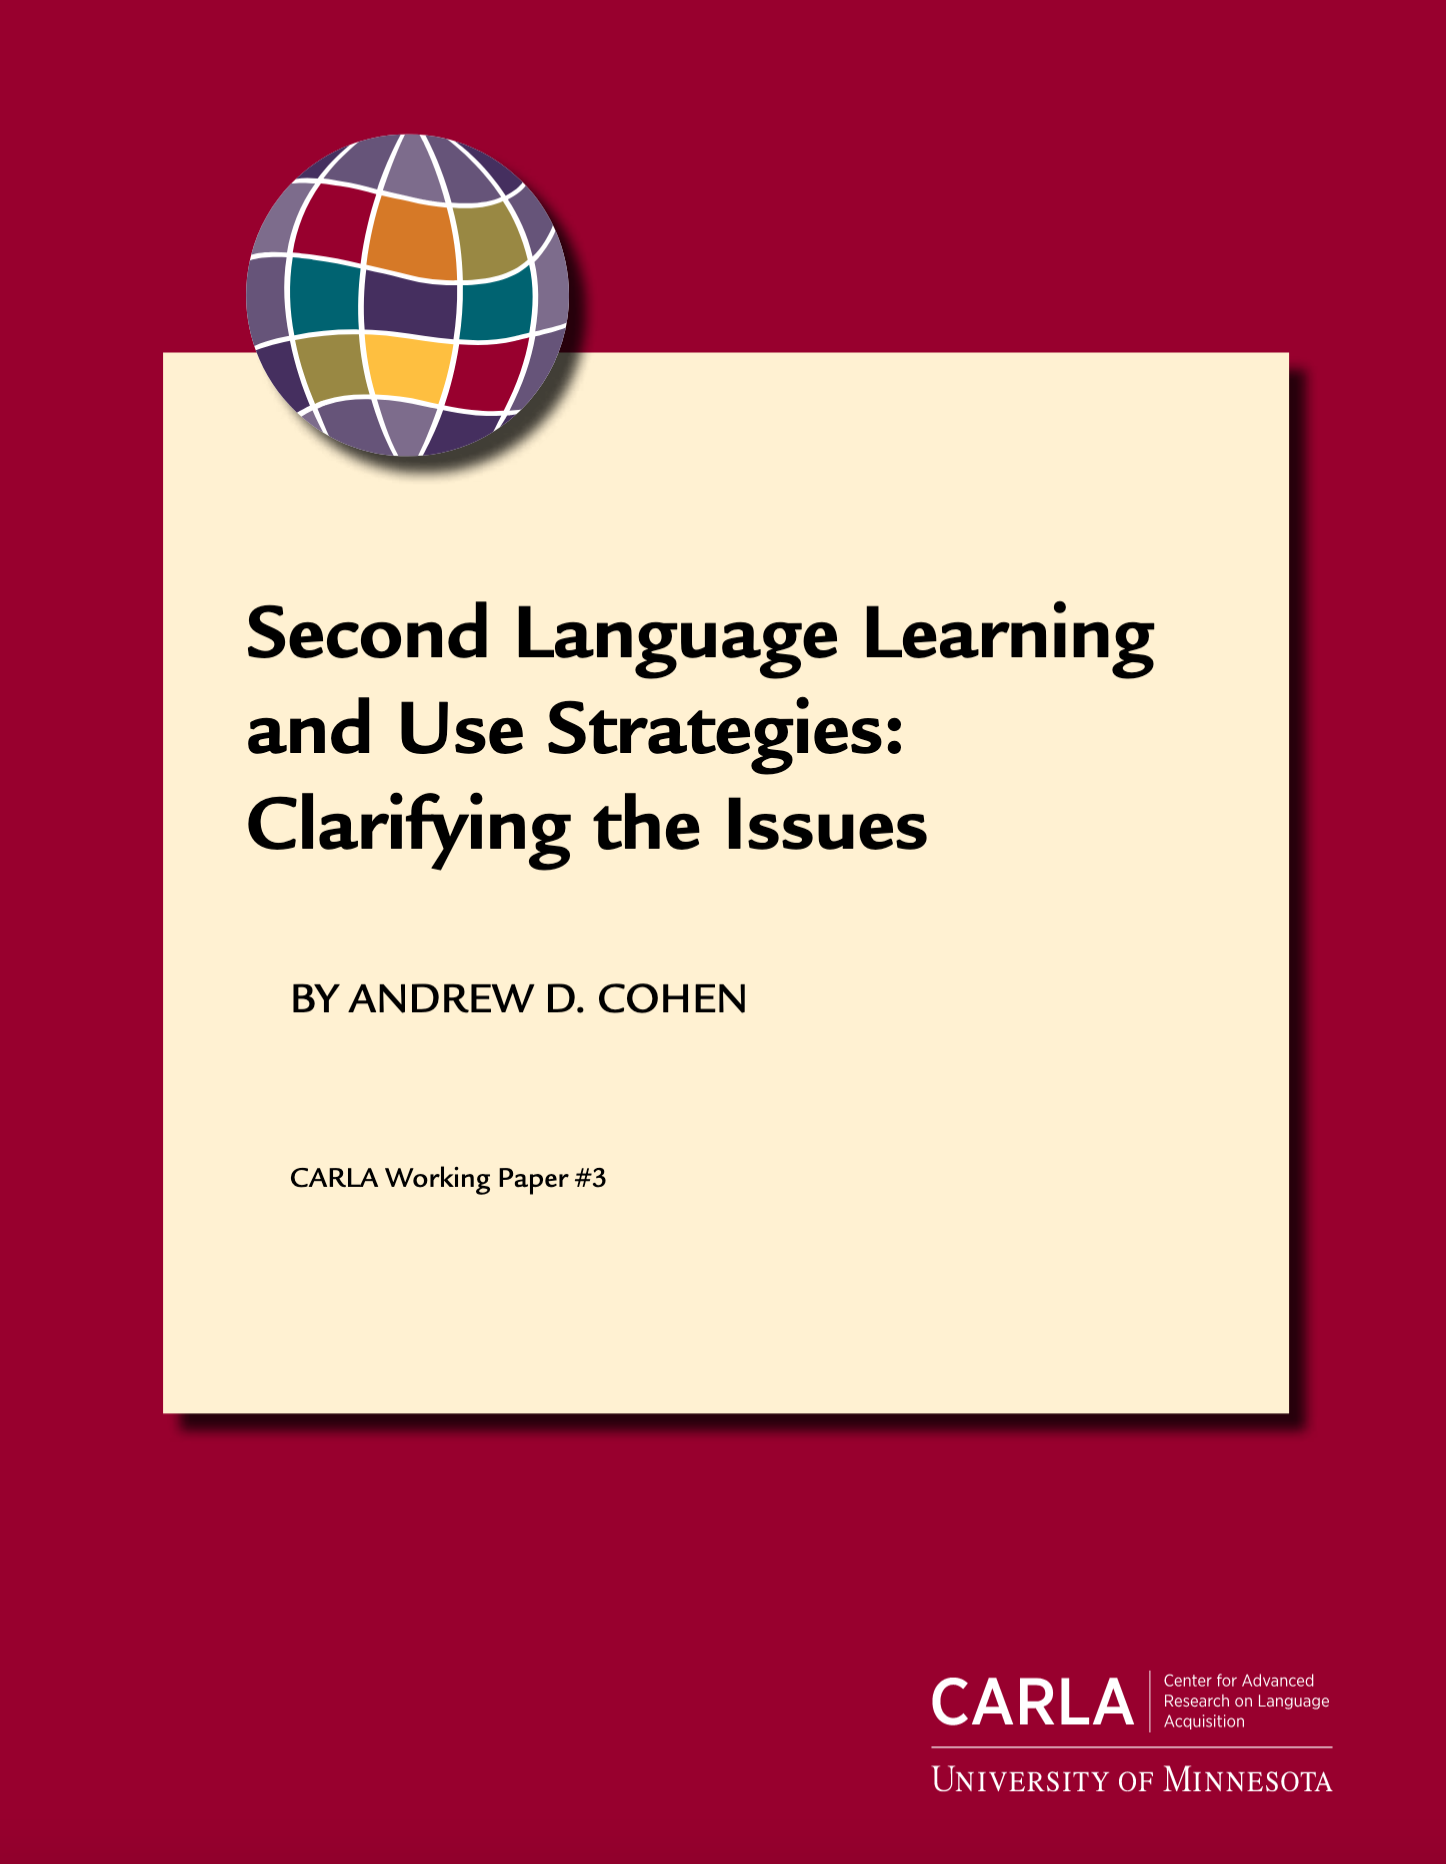 Second Language Learning and Use Strategies